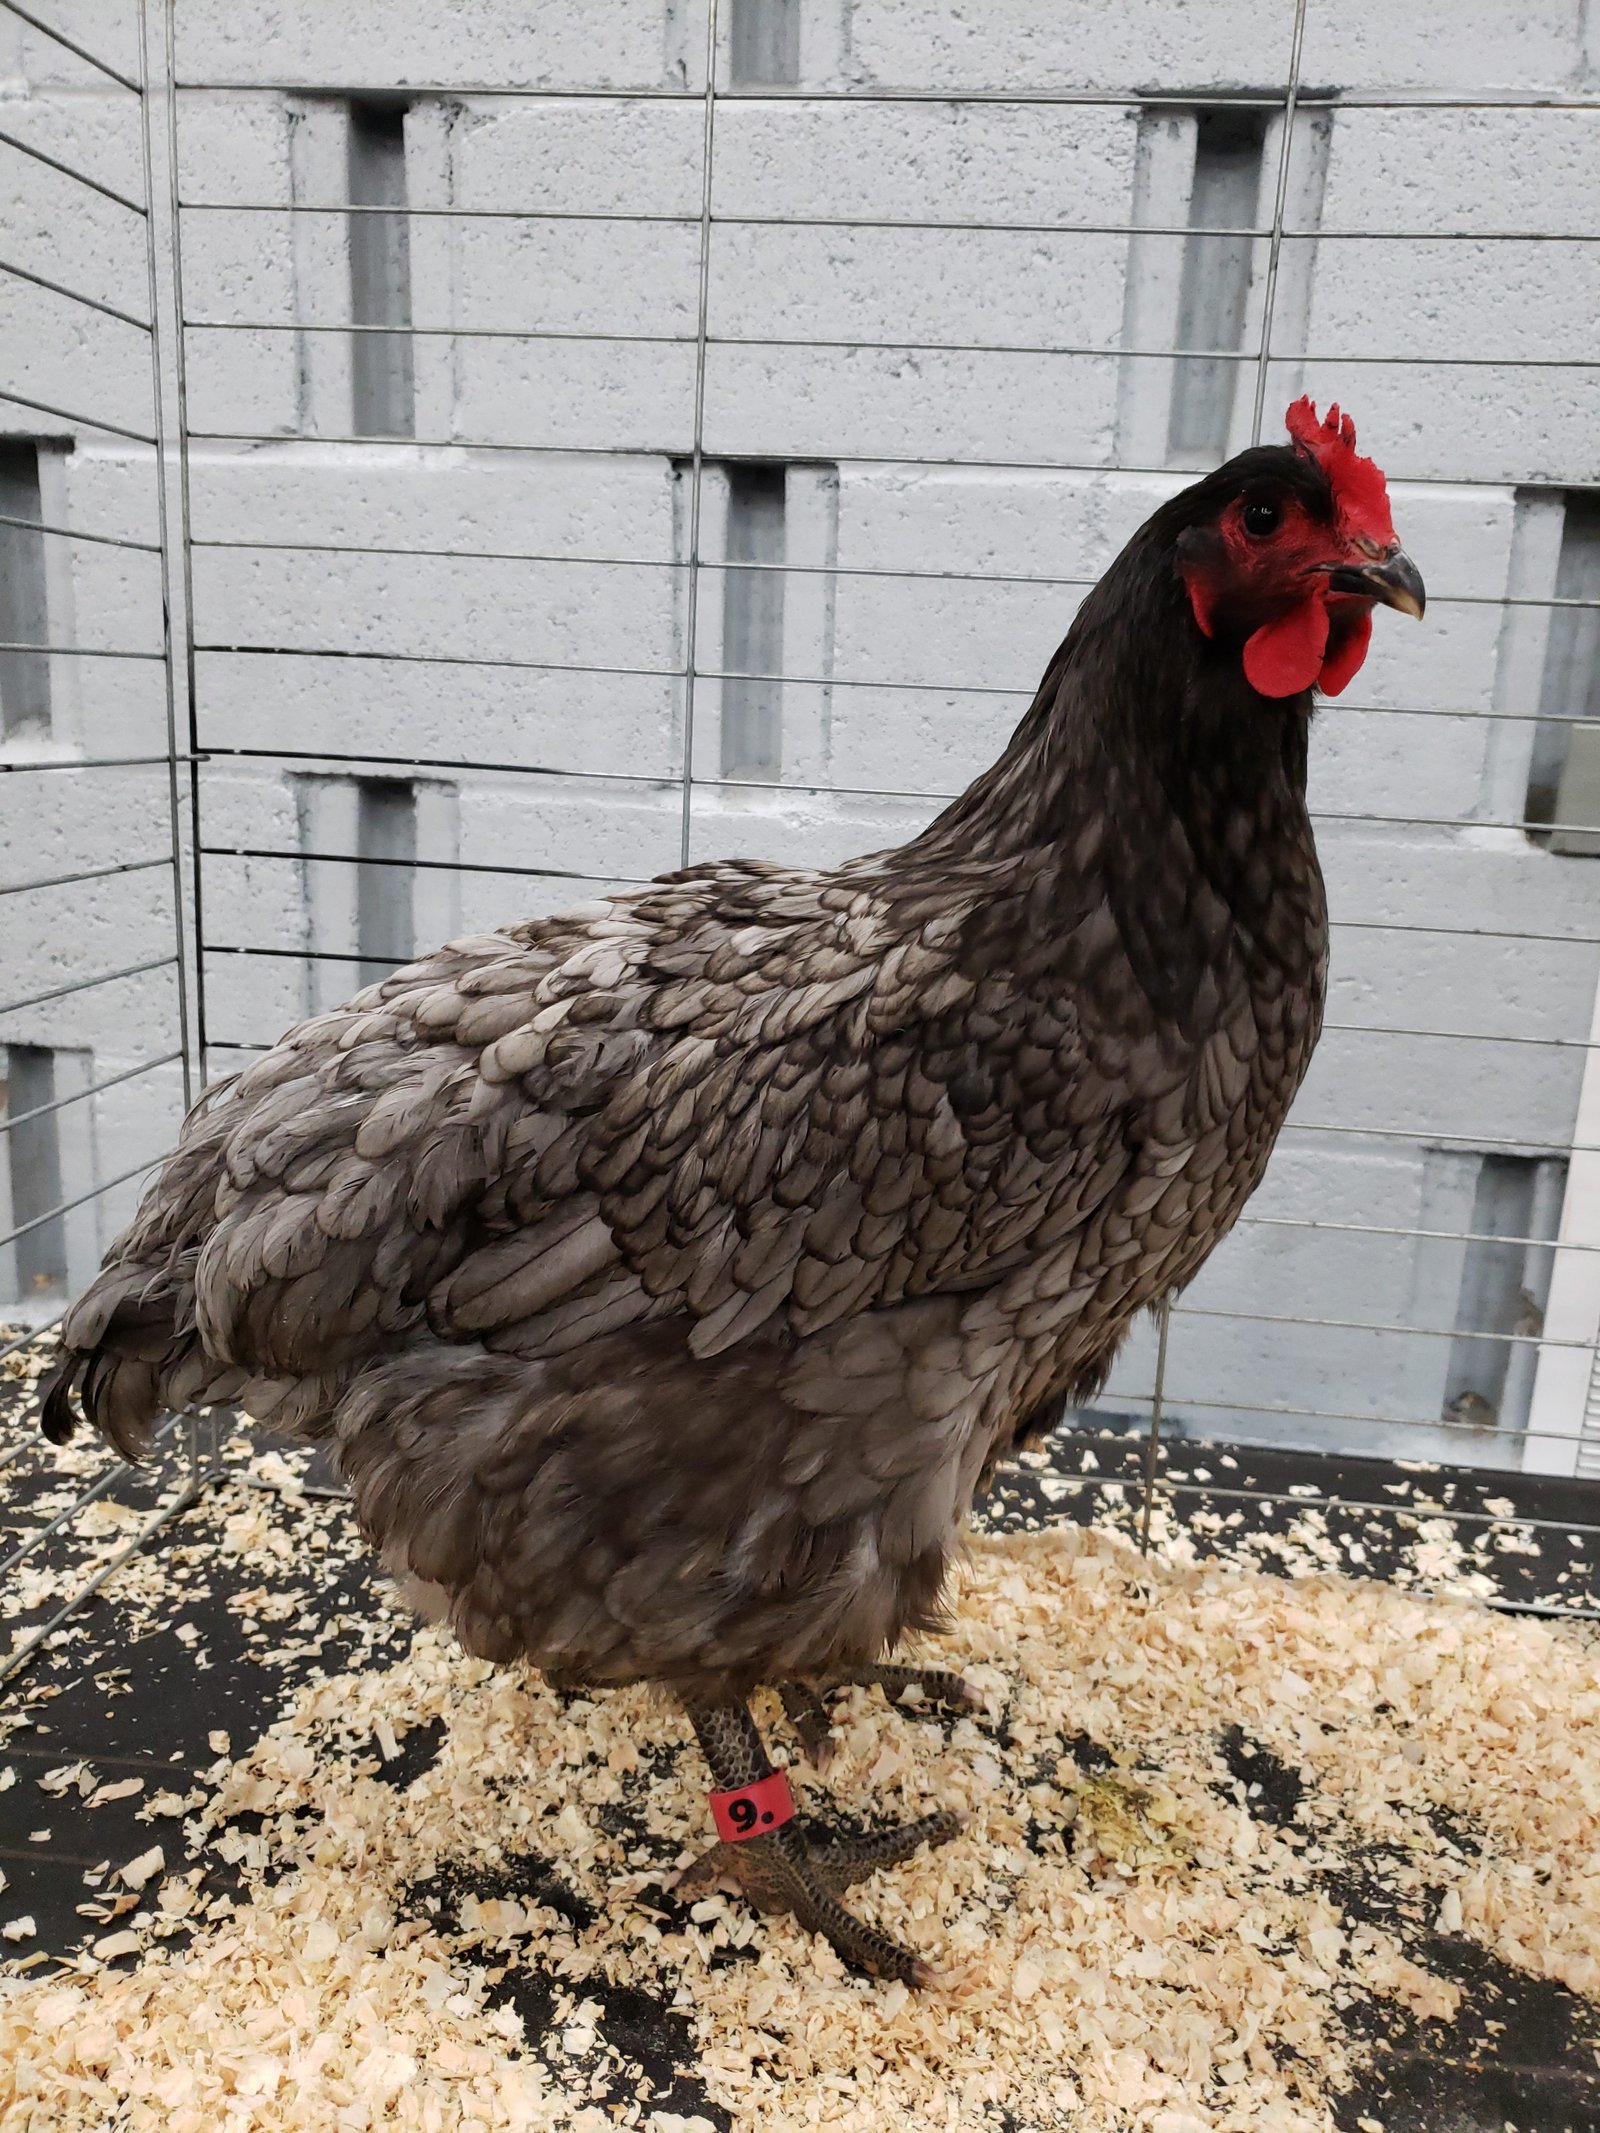 jersey giant chicken rooster